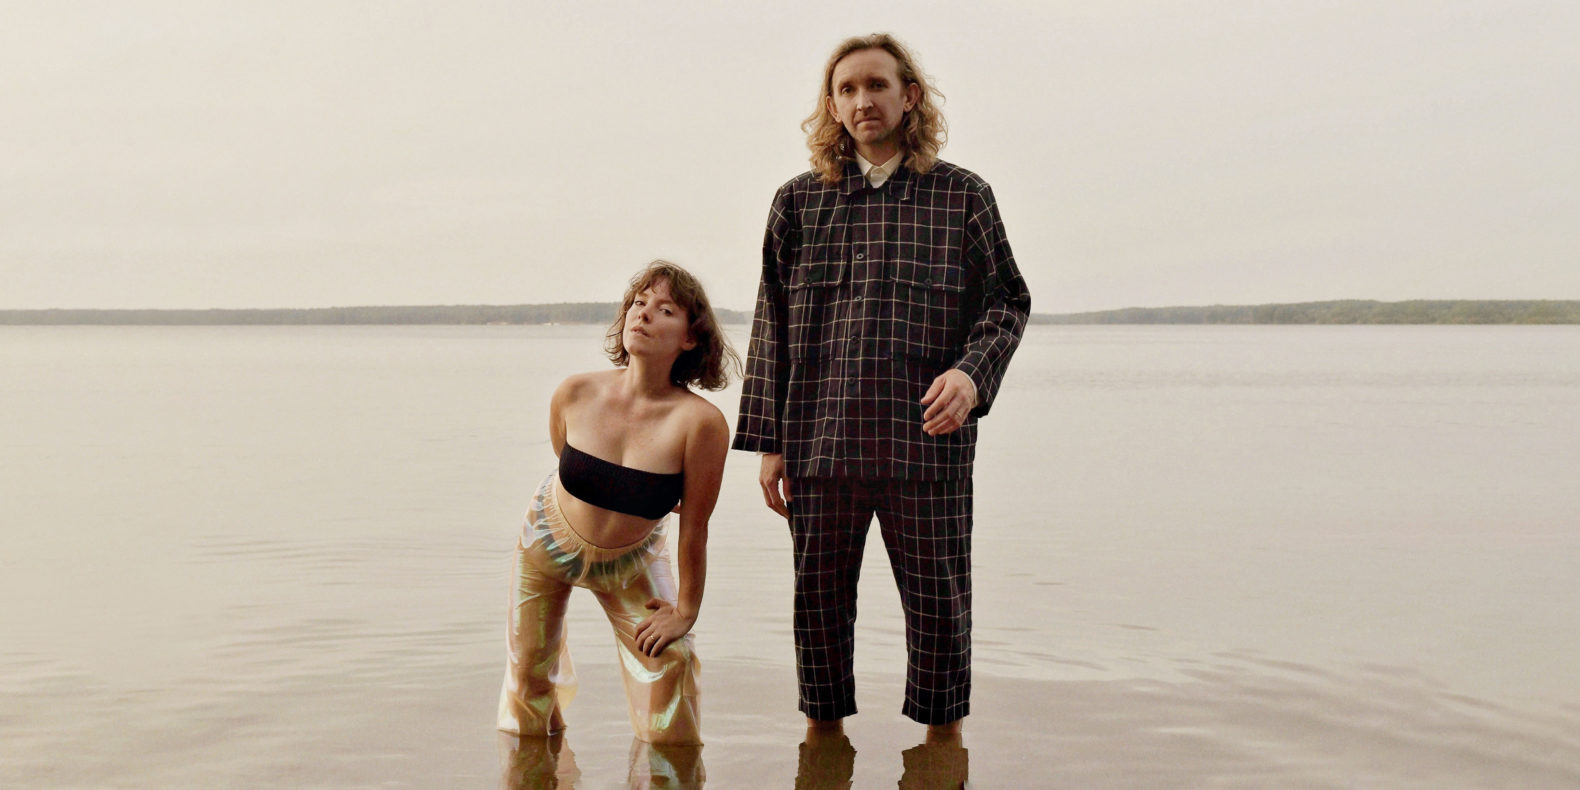 Sylvan Esso, singer Amelia Meath and producer Nick Sanborn, standing in a lake